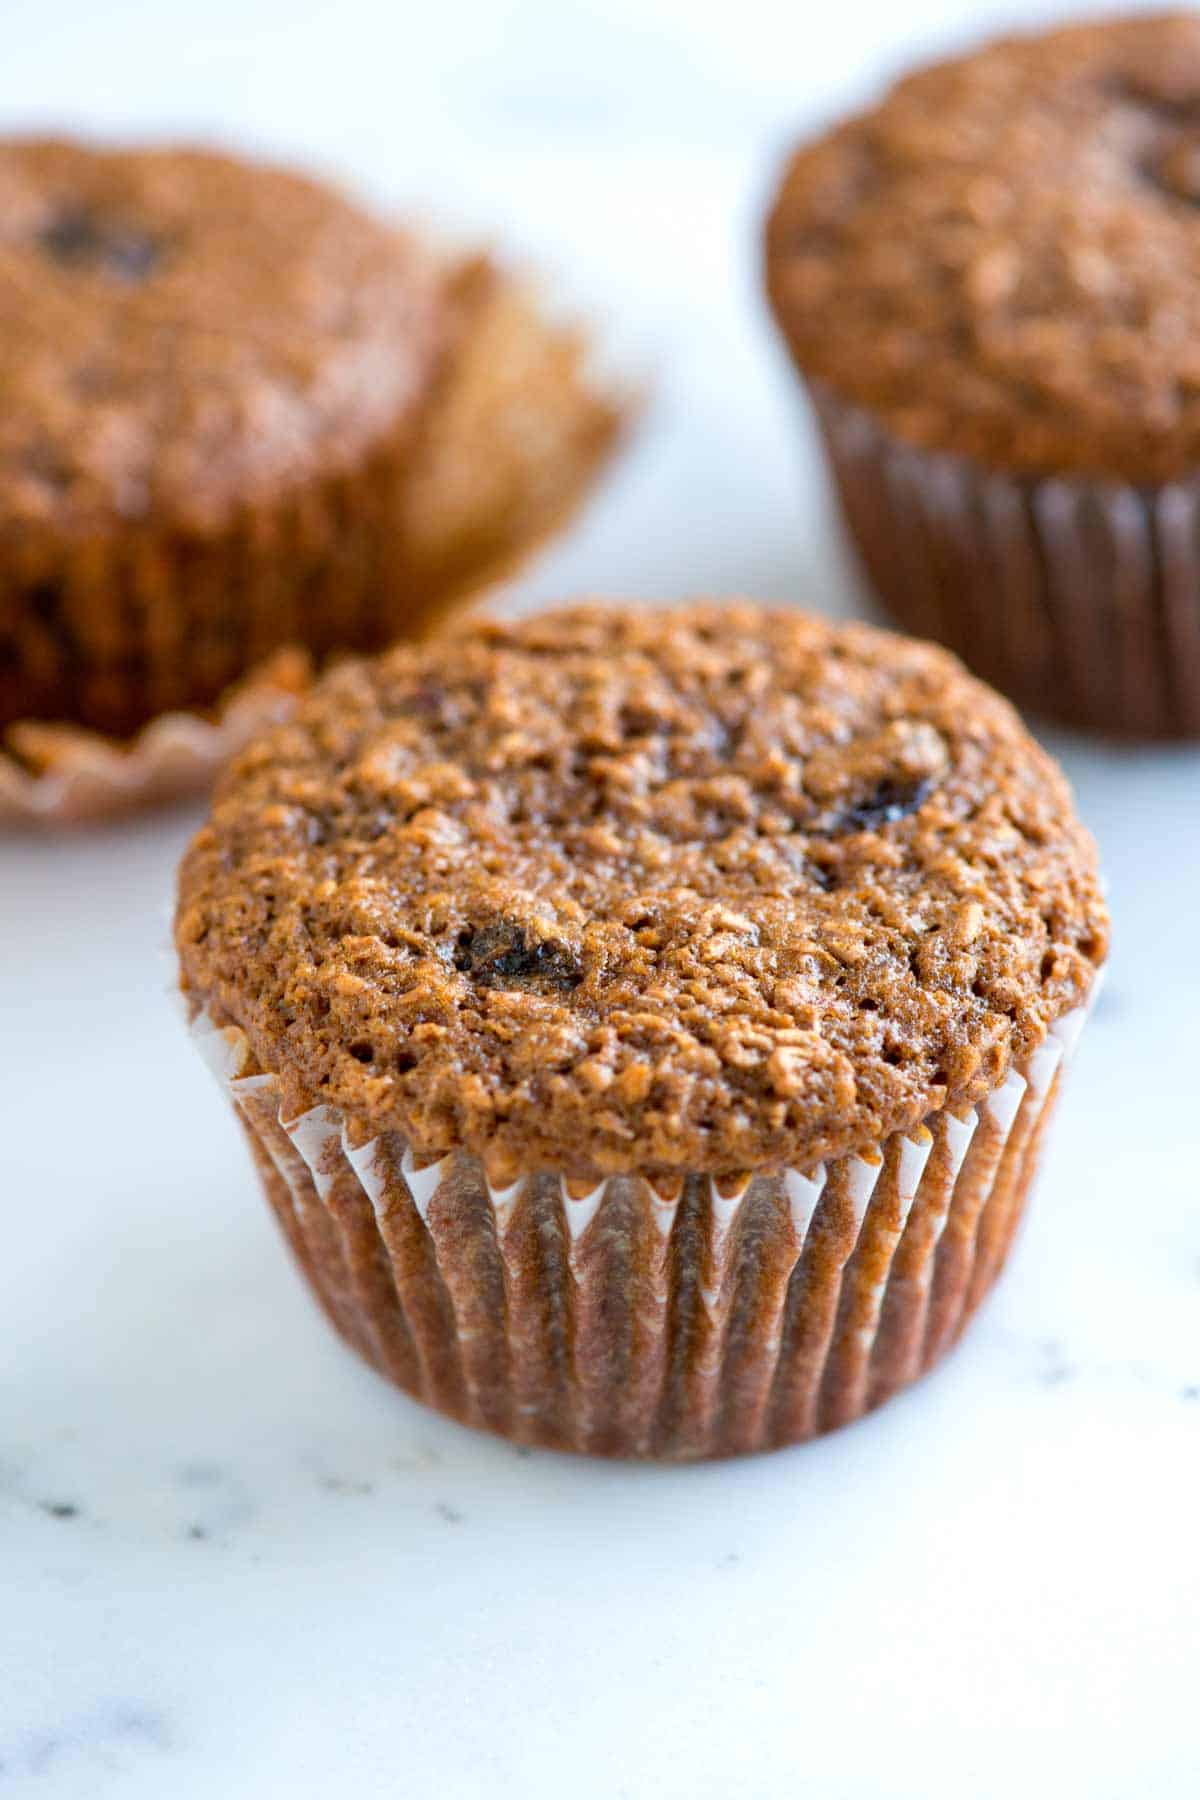 How Many Calories are in a Bran Muffin 